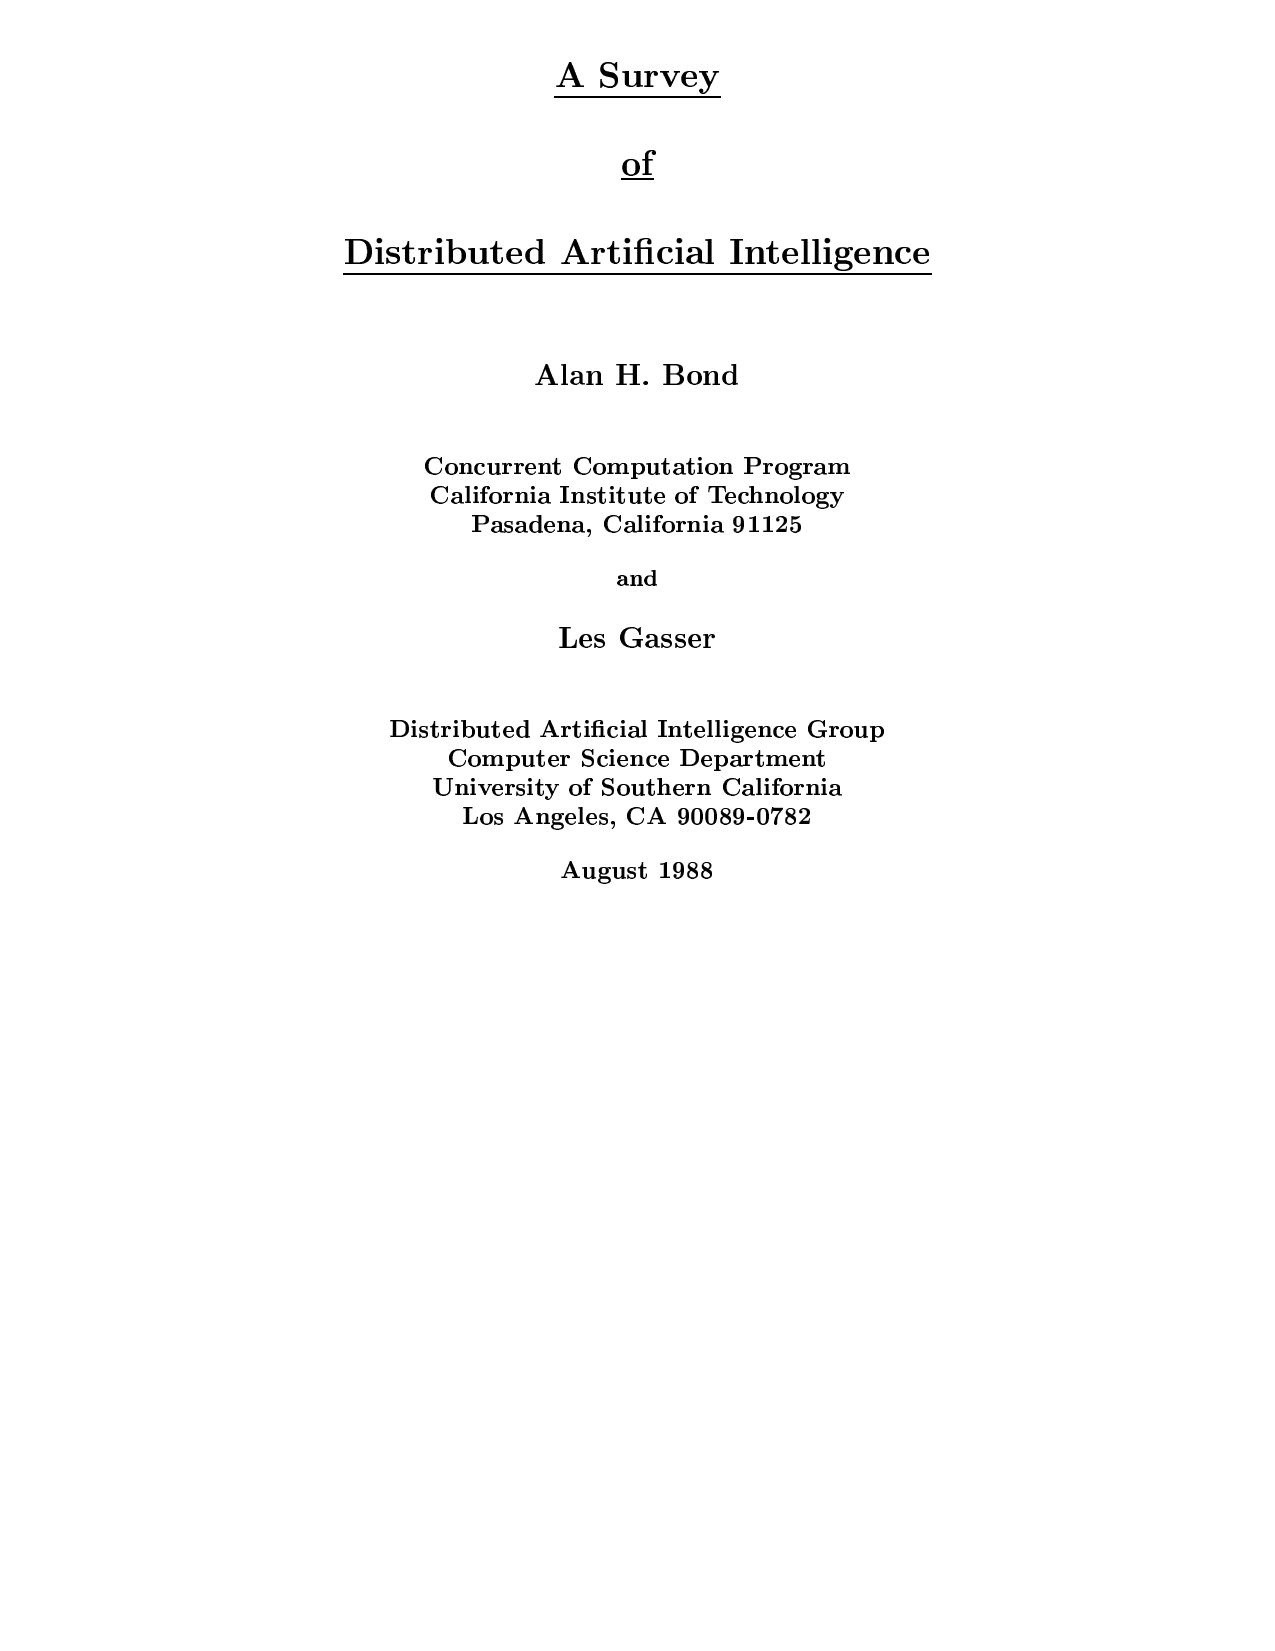 A Survey Of Distributed Artificial Intelligence Manualzz